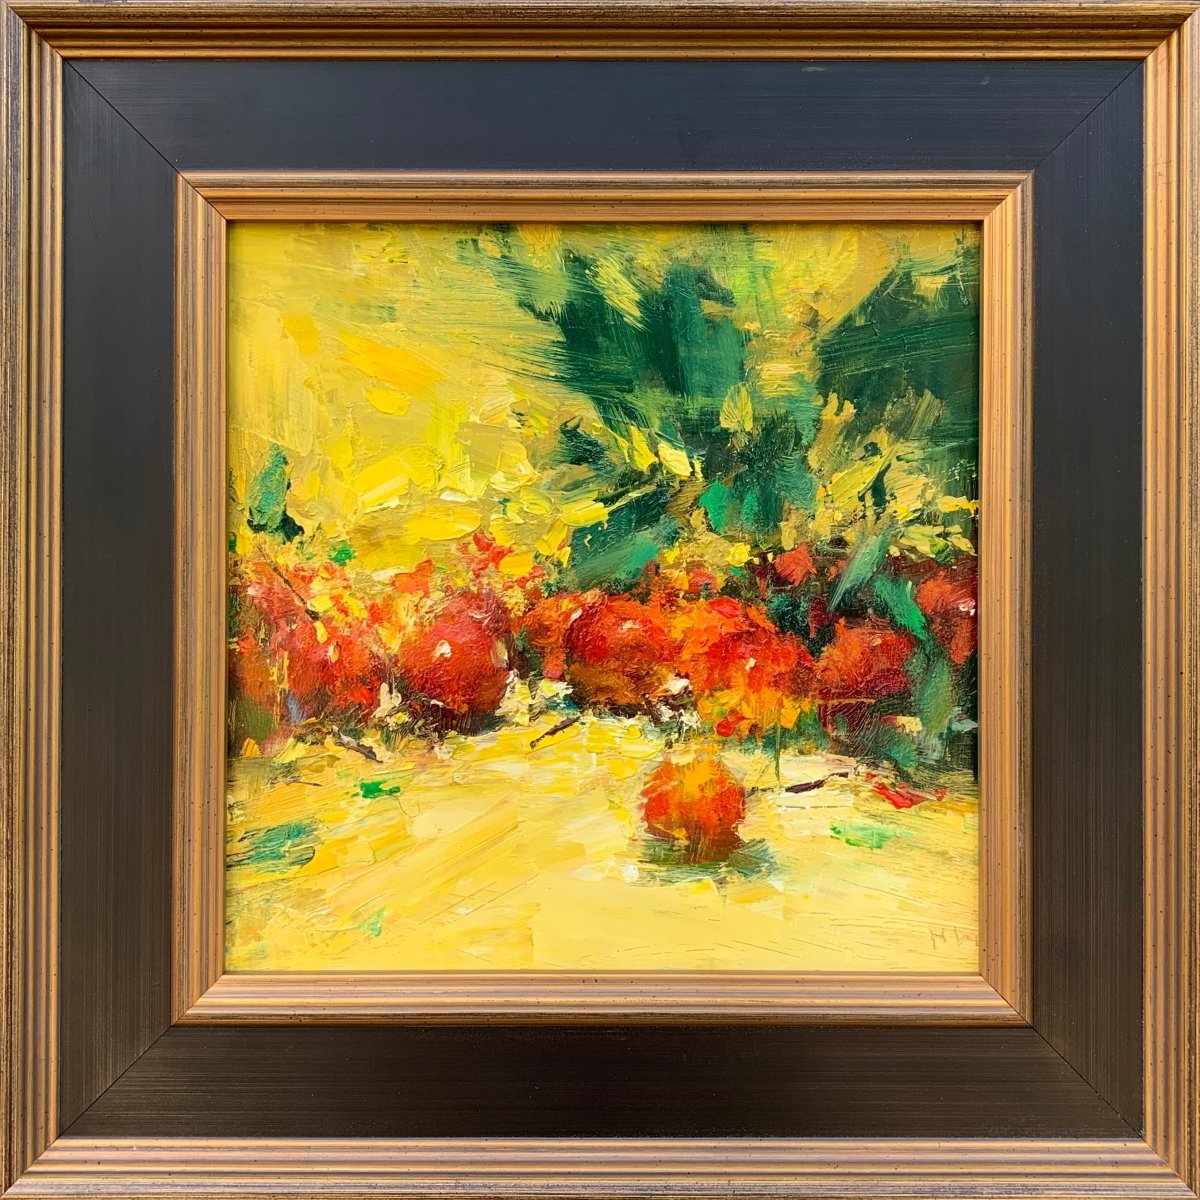 Crabapples by Ning Lee at LePrince Galleries